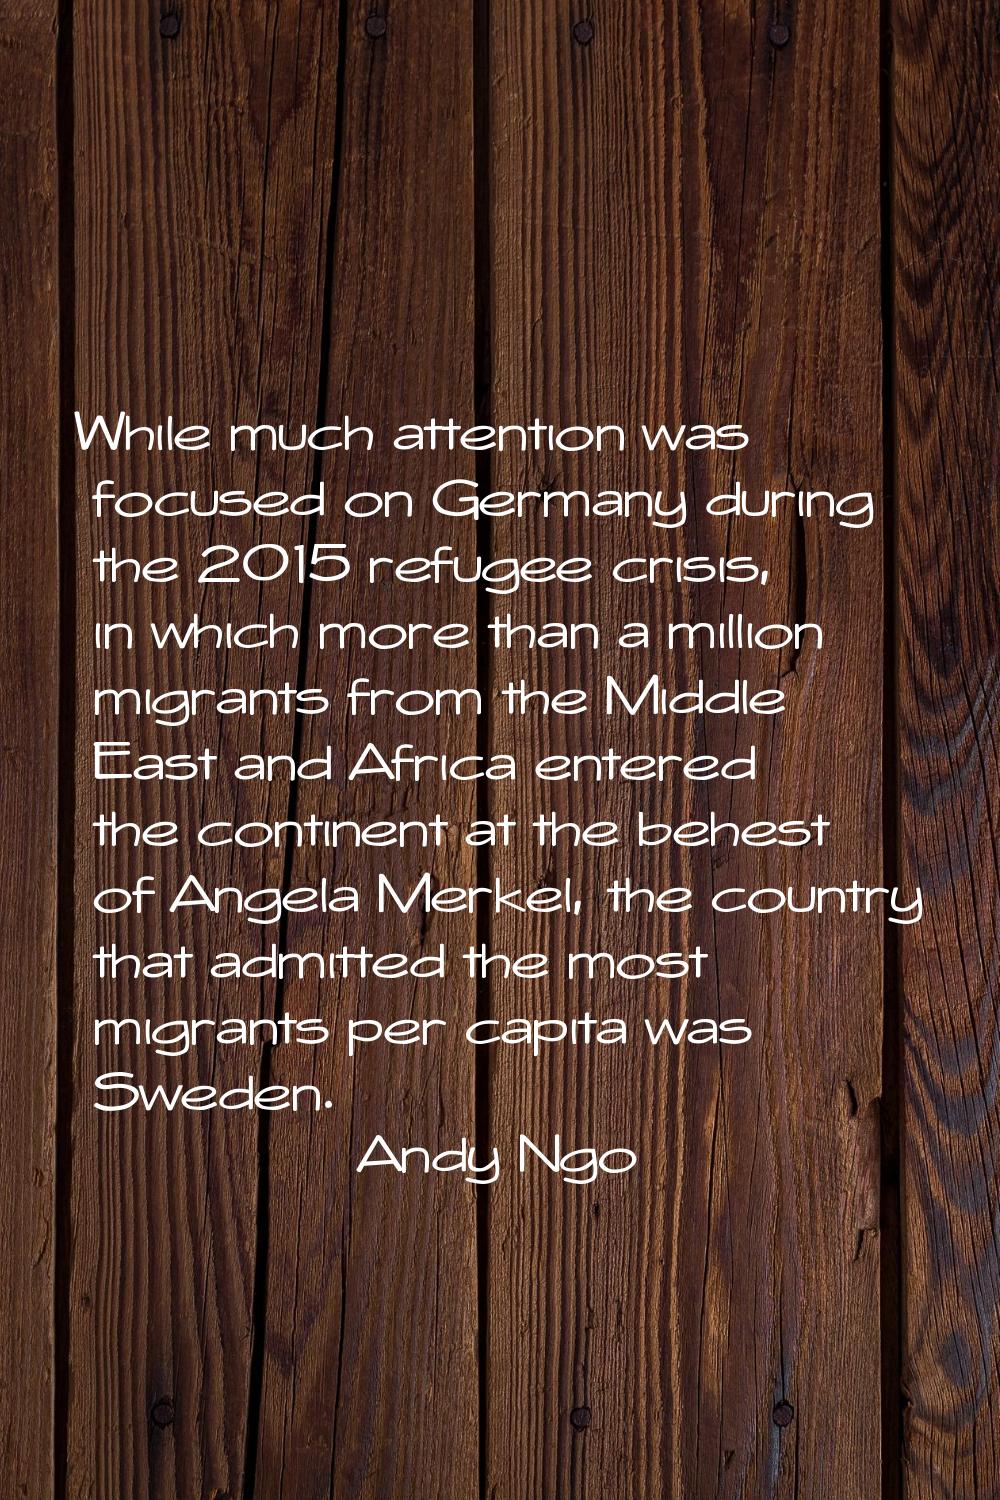 While much attention was focused on Germany during the 2015 refugee crisis, in which more than a mi